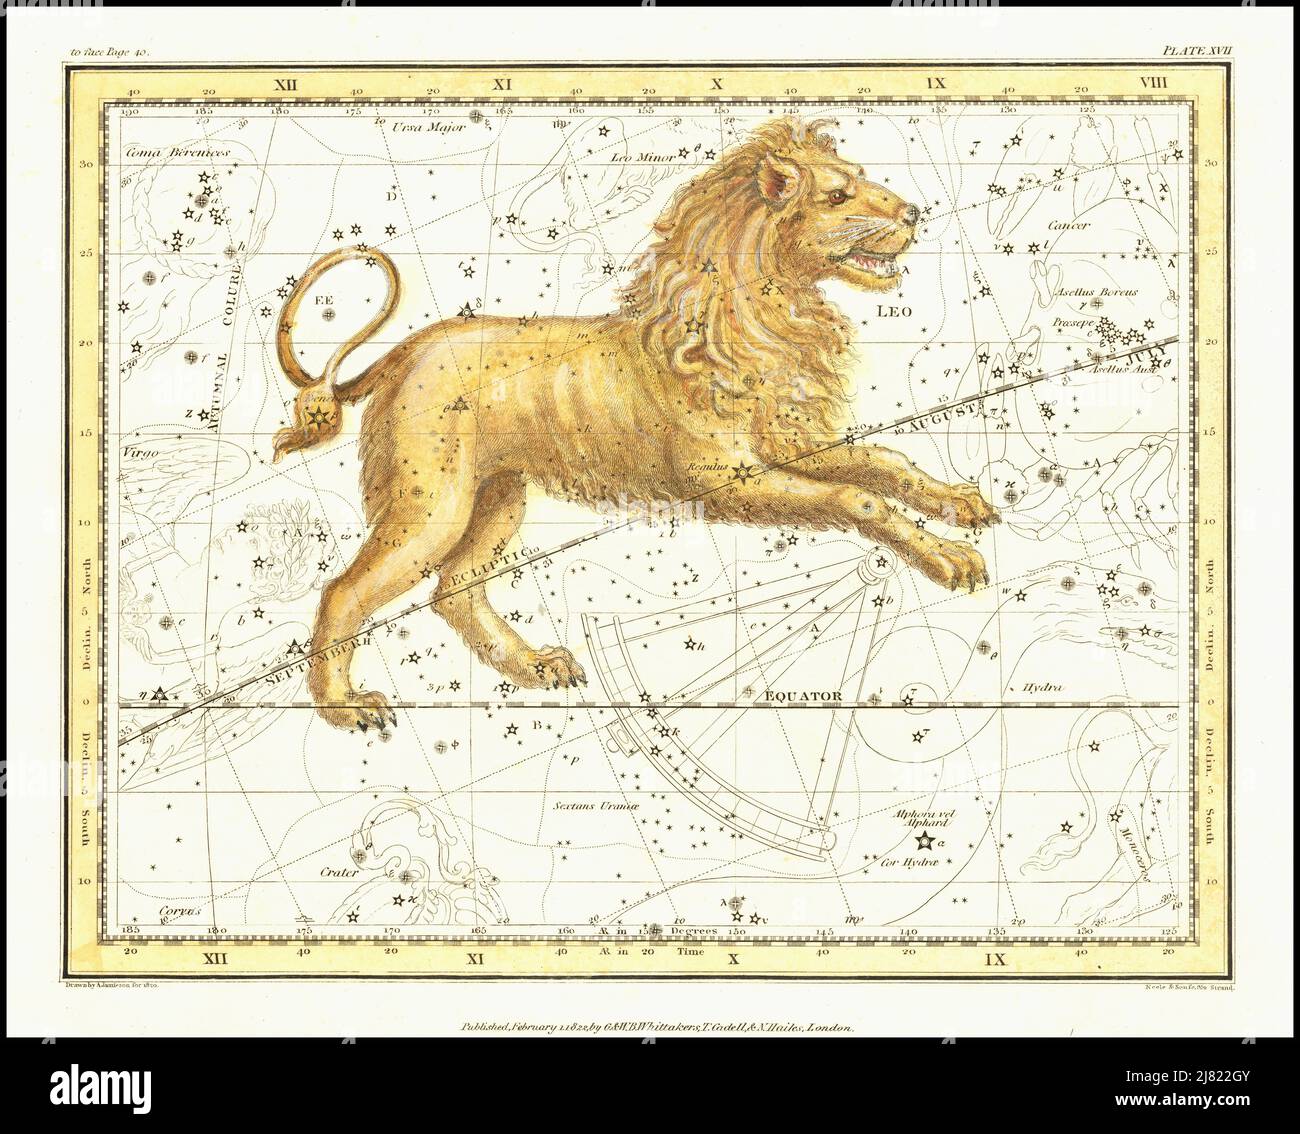 Alexander Jamieson - Leo the Lion - Plate 17 from A celestial atlas comprising a systematic display of the heavens - 1822 Stock Photo